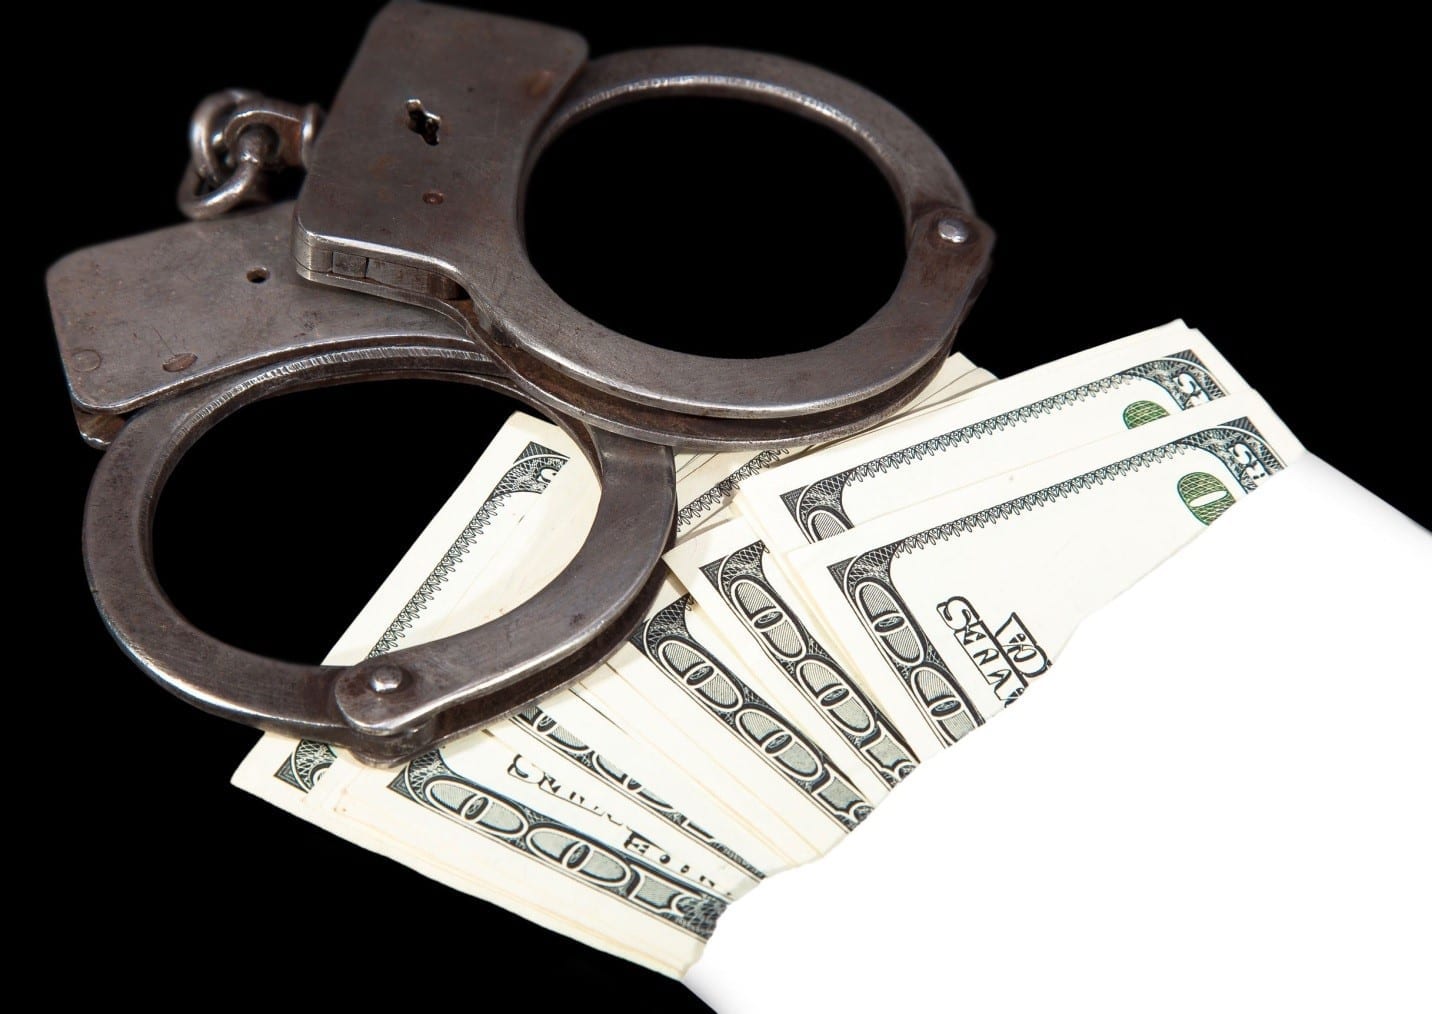 Employee Theft in Chicago - A Serious Crime with Serious Penalties